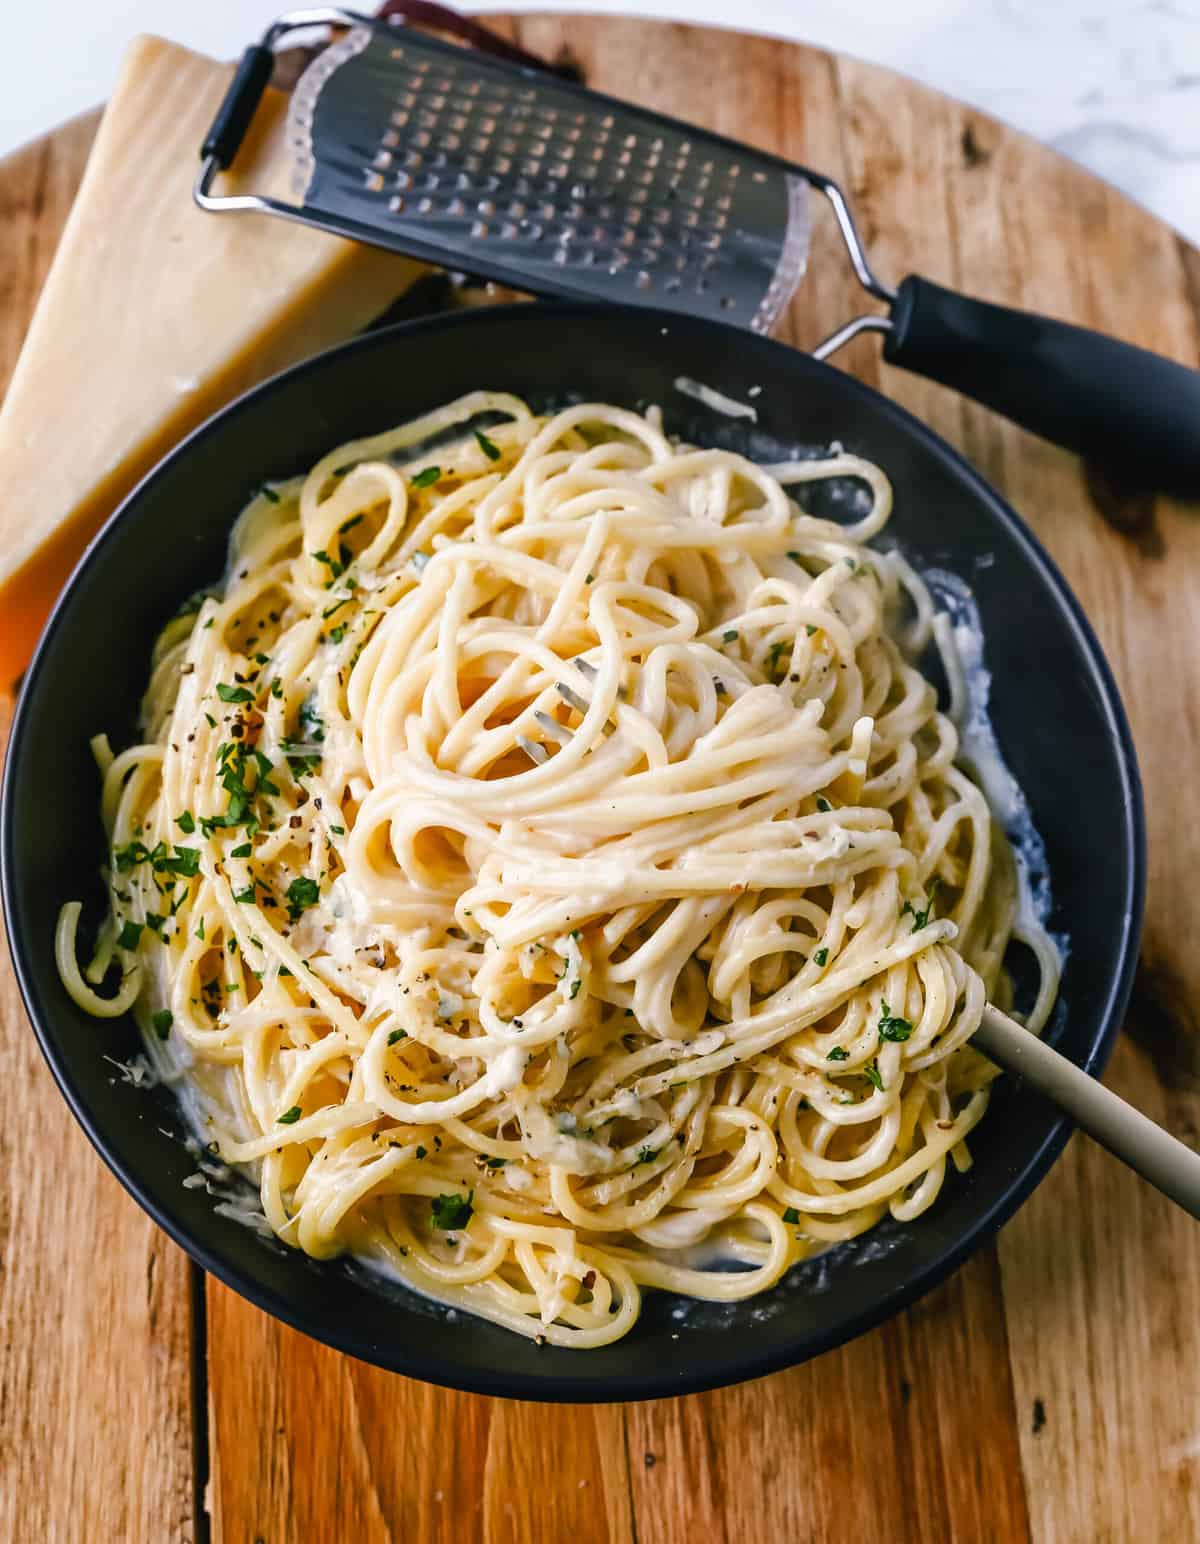 Break-Up Pasta is a creamy 3-Cheese Spaghetti Recipe made with butter, garlic, cream, broth, Italian cheeses, spices, and tossed in spaghetti. It is the best creamy spaghetti recipe known to help cure breakups!